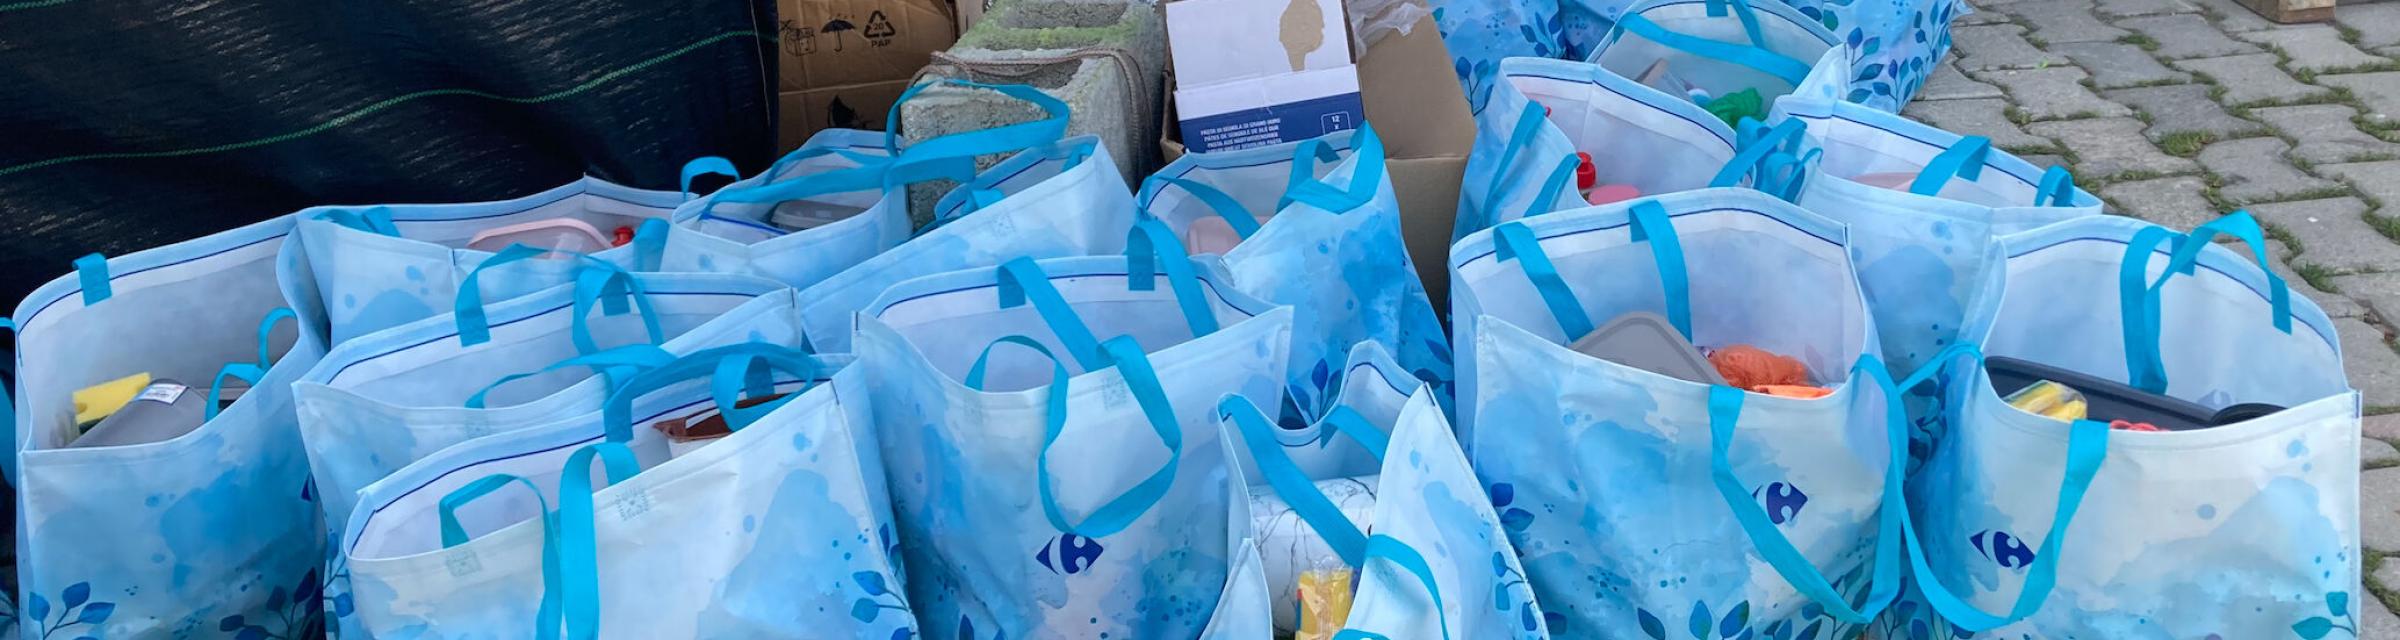 OM'ers and OM partners bringing help after the 2023 earthquakes in Turkey. They are giving away bags of essential products to the families affected by the earthquake.